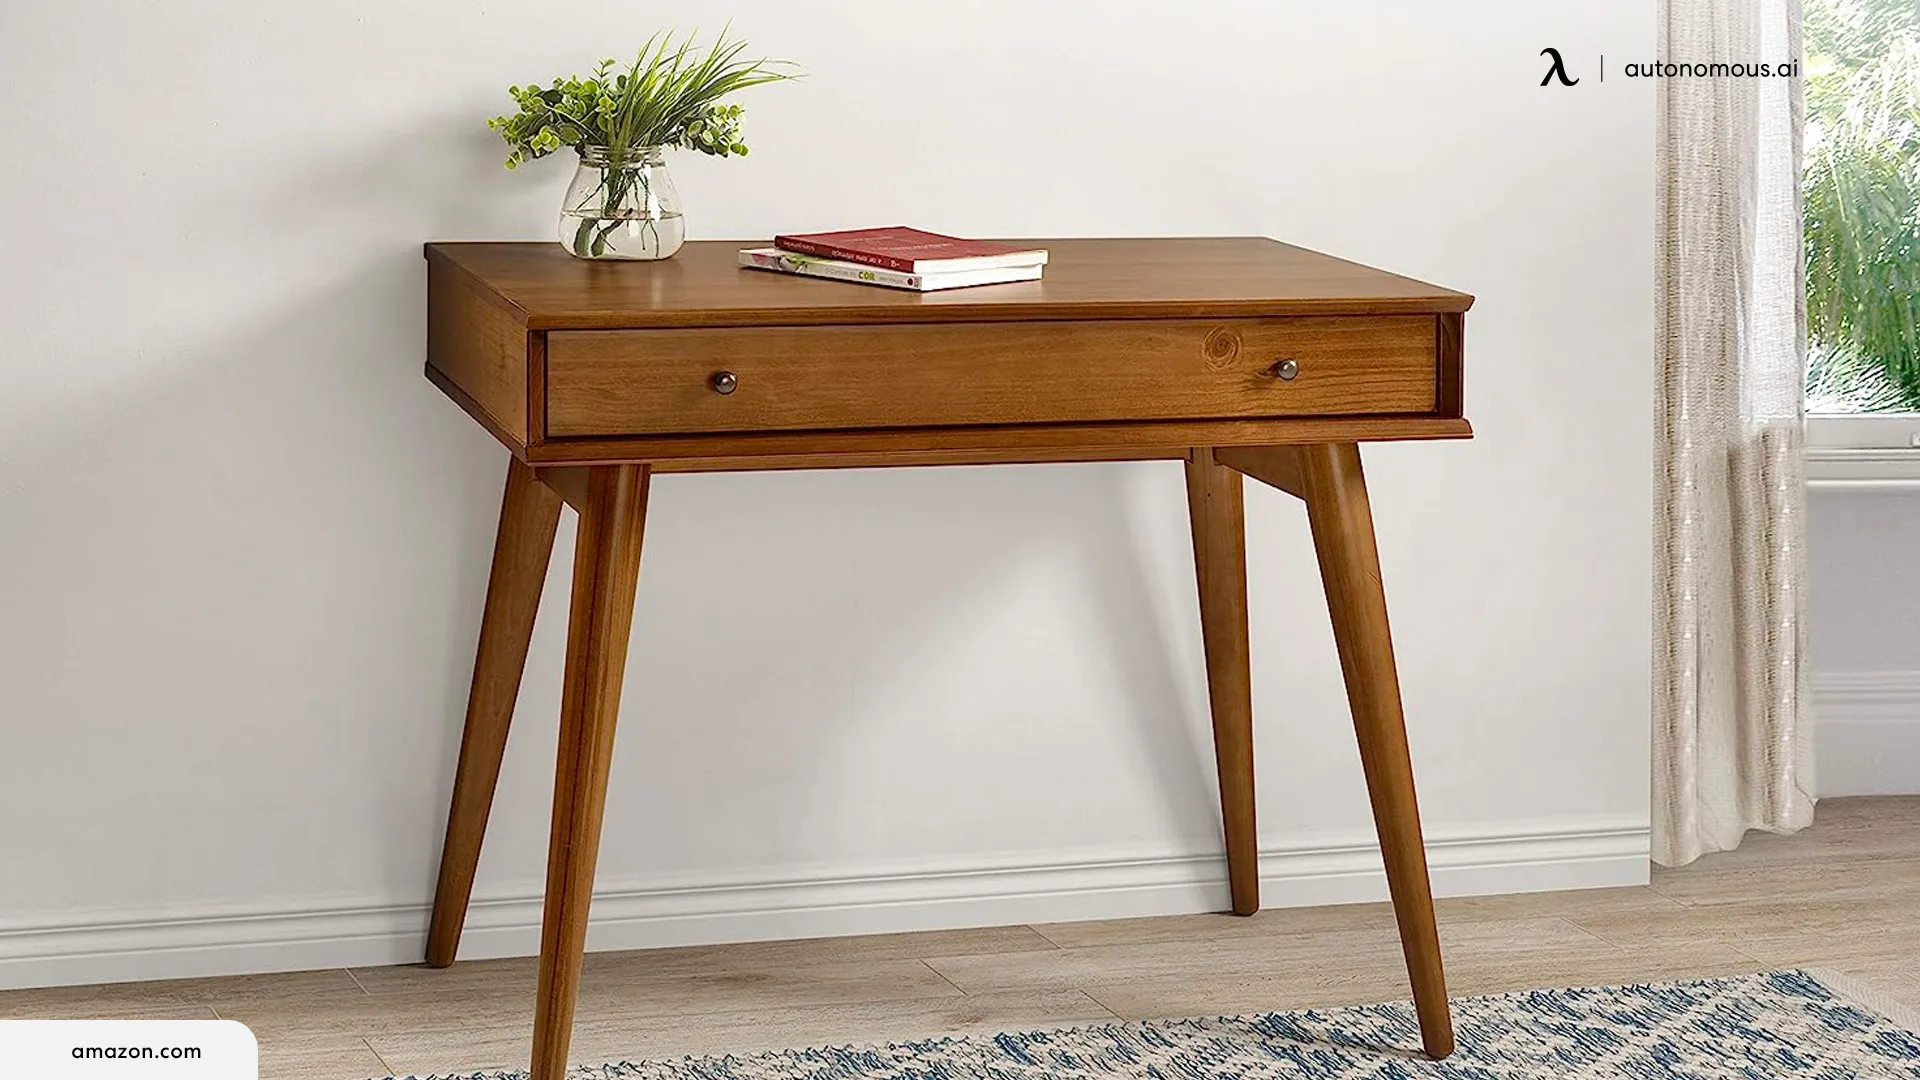 Materials and Colors - mid century modern desk